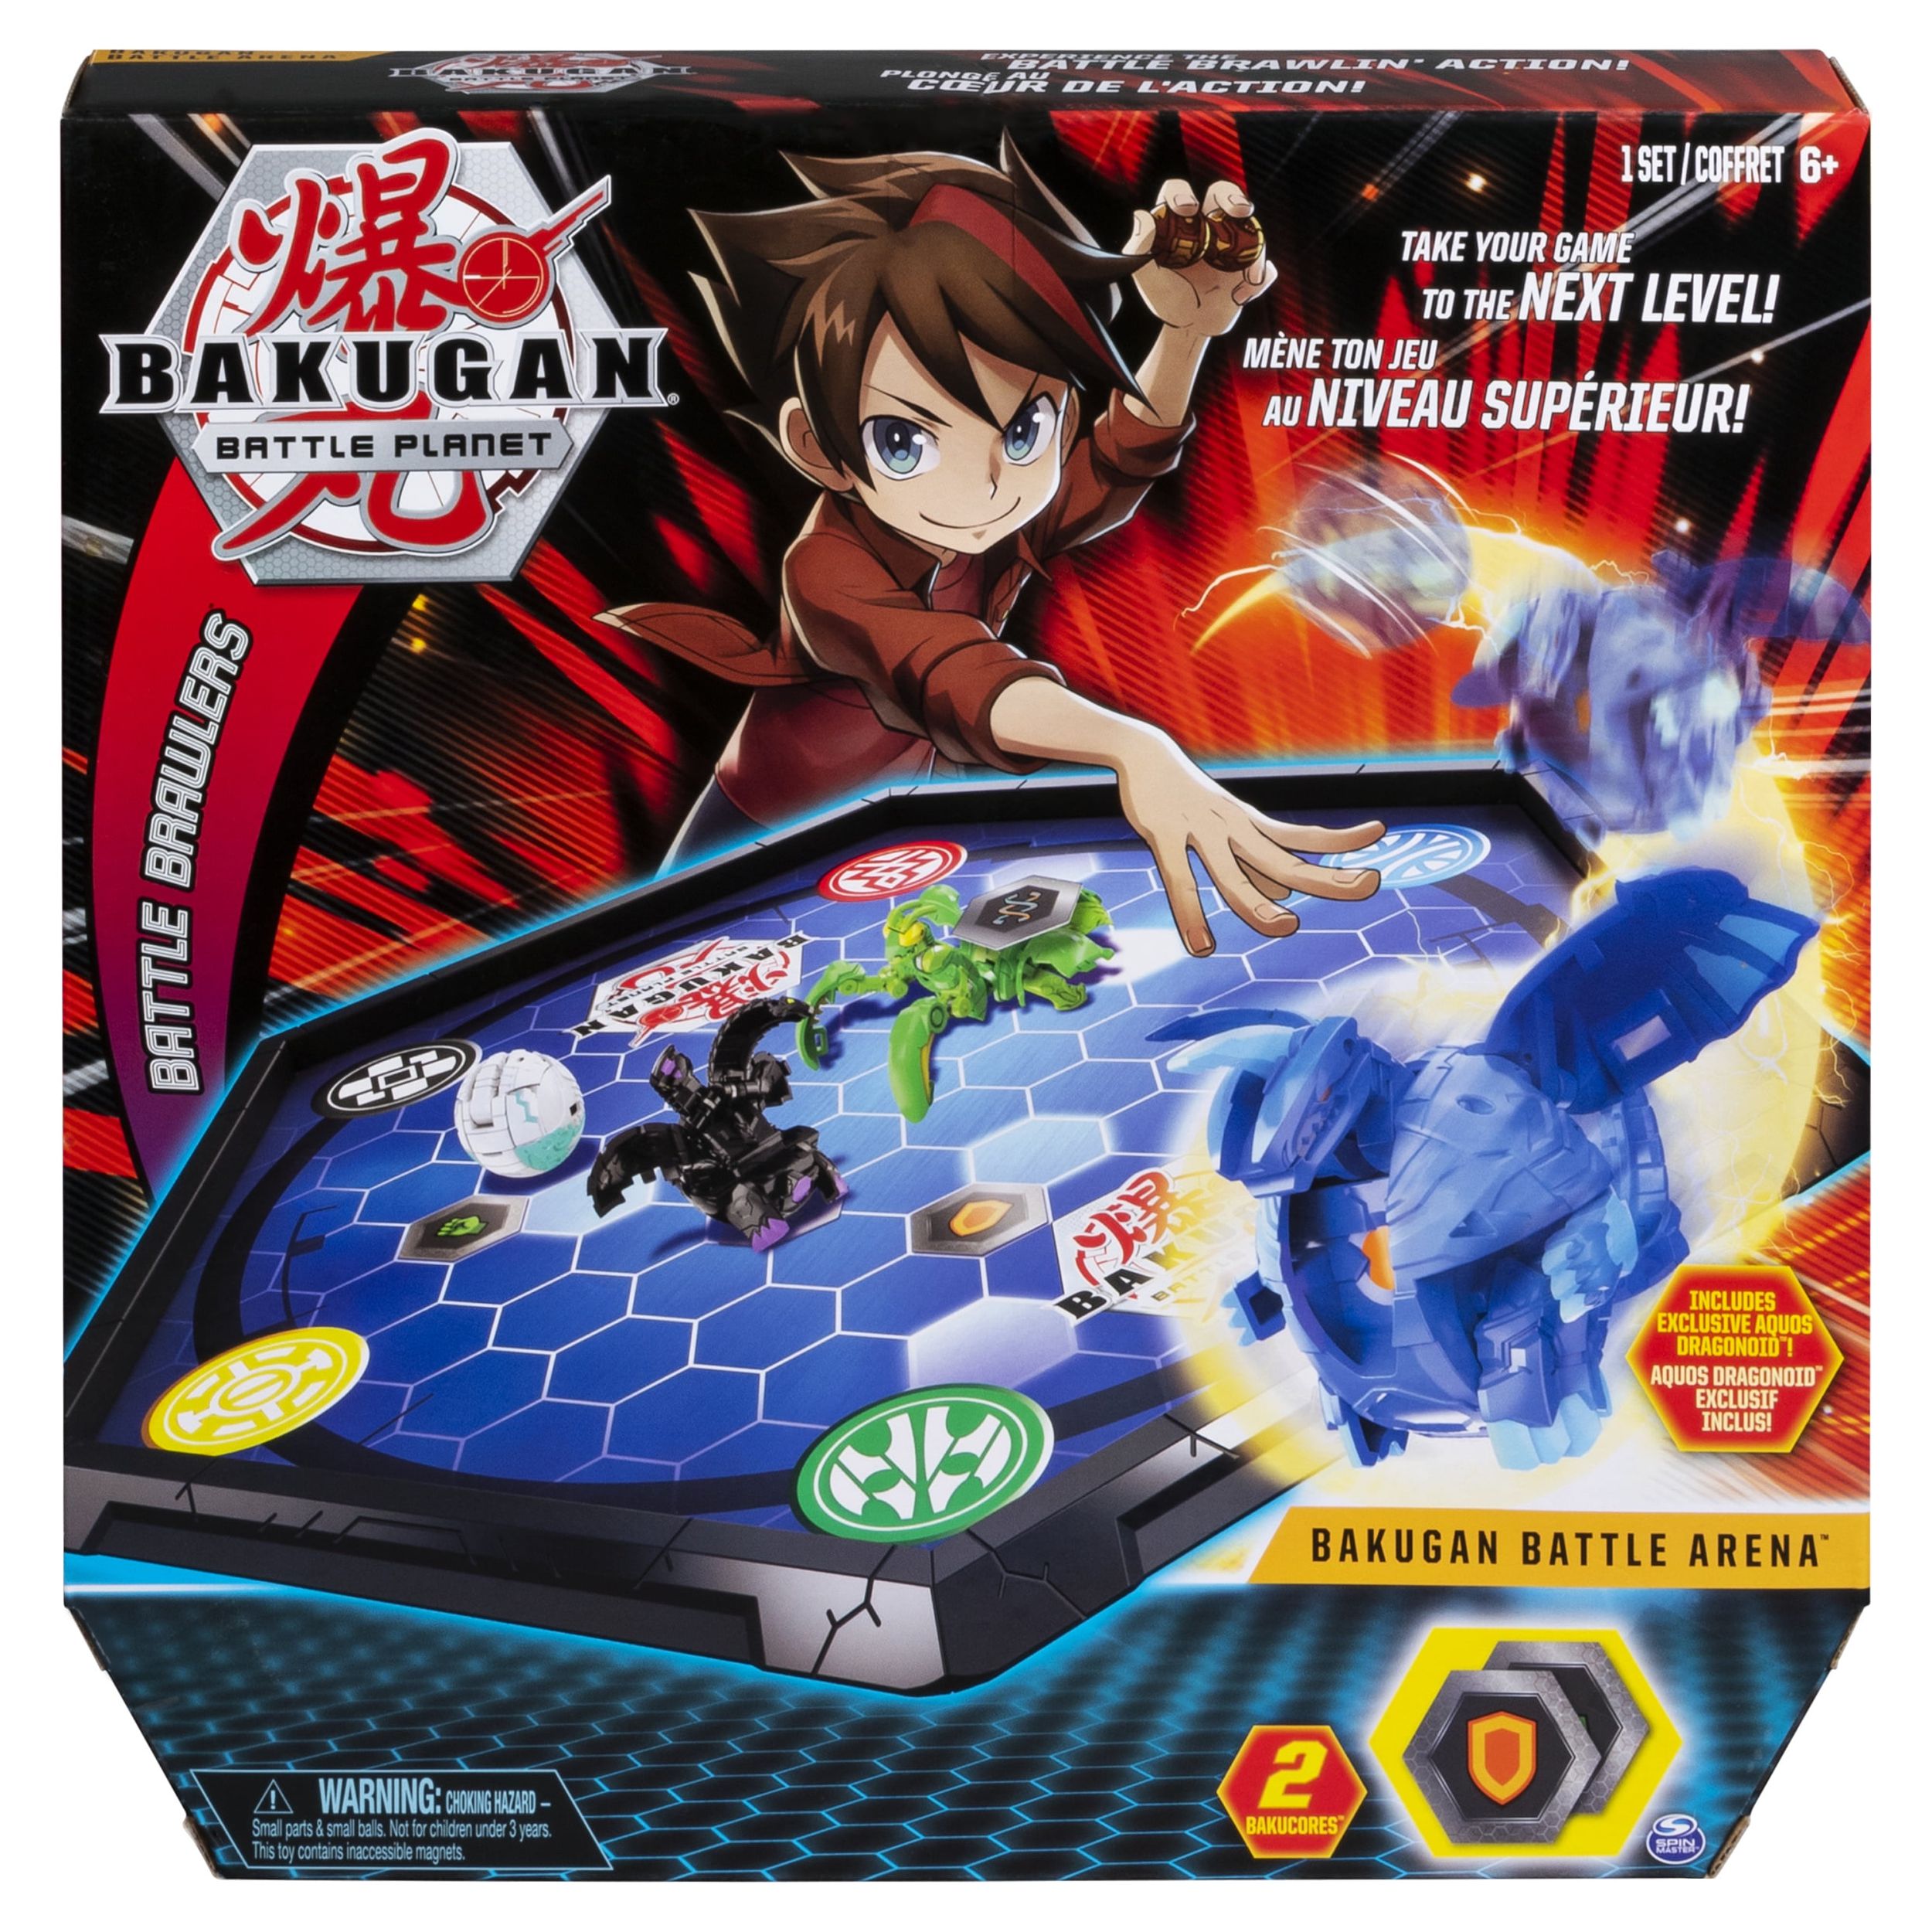 Bakugan Battle Arena, Game Board for Bakugan Collectibles, for Ages 6 and Up (Edition May Vary) - image 1 of 8